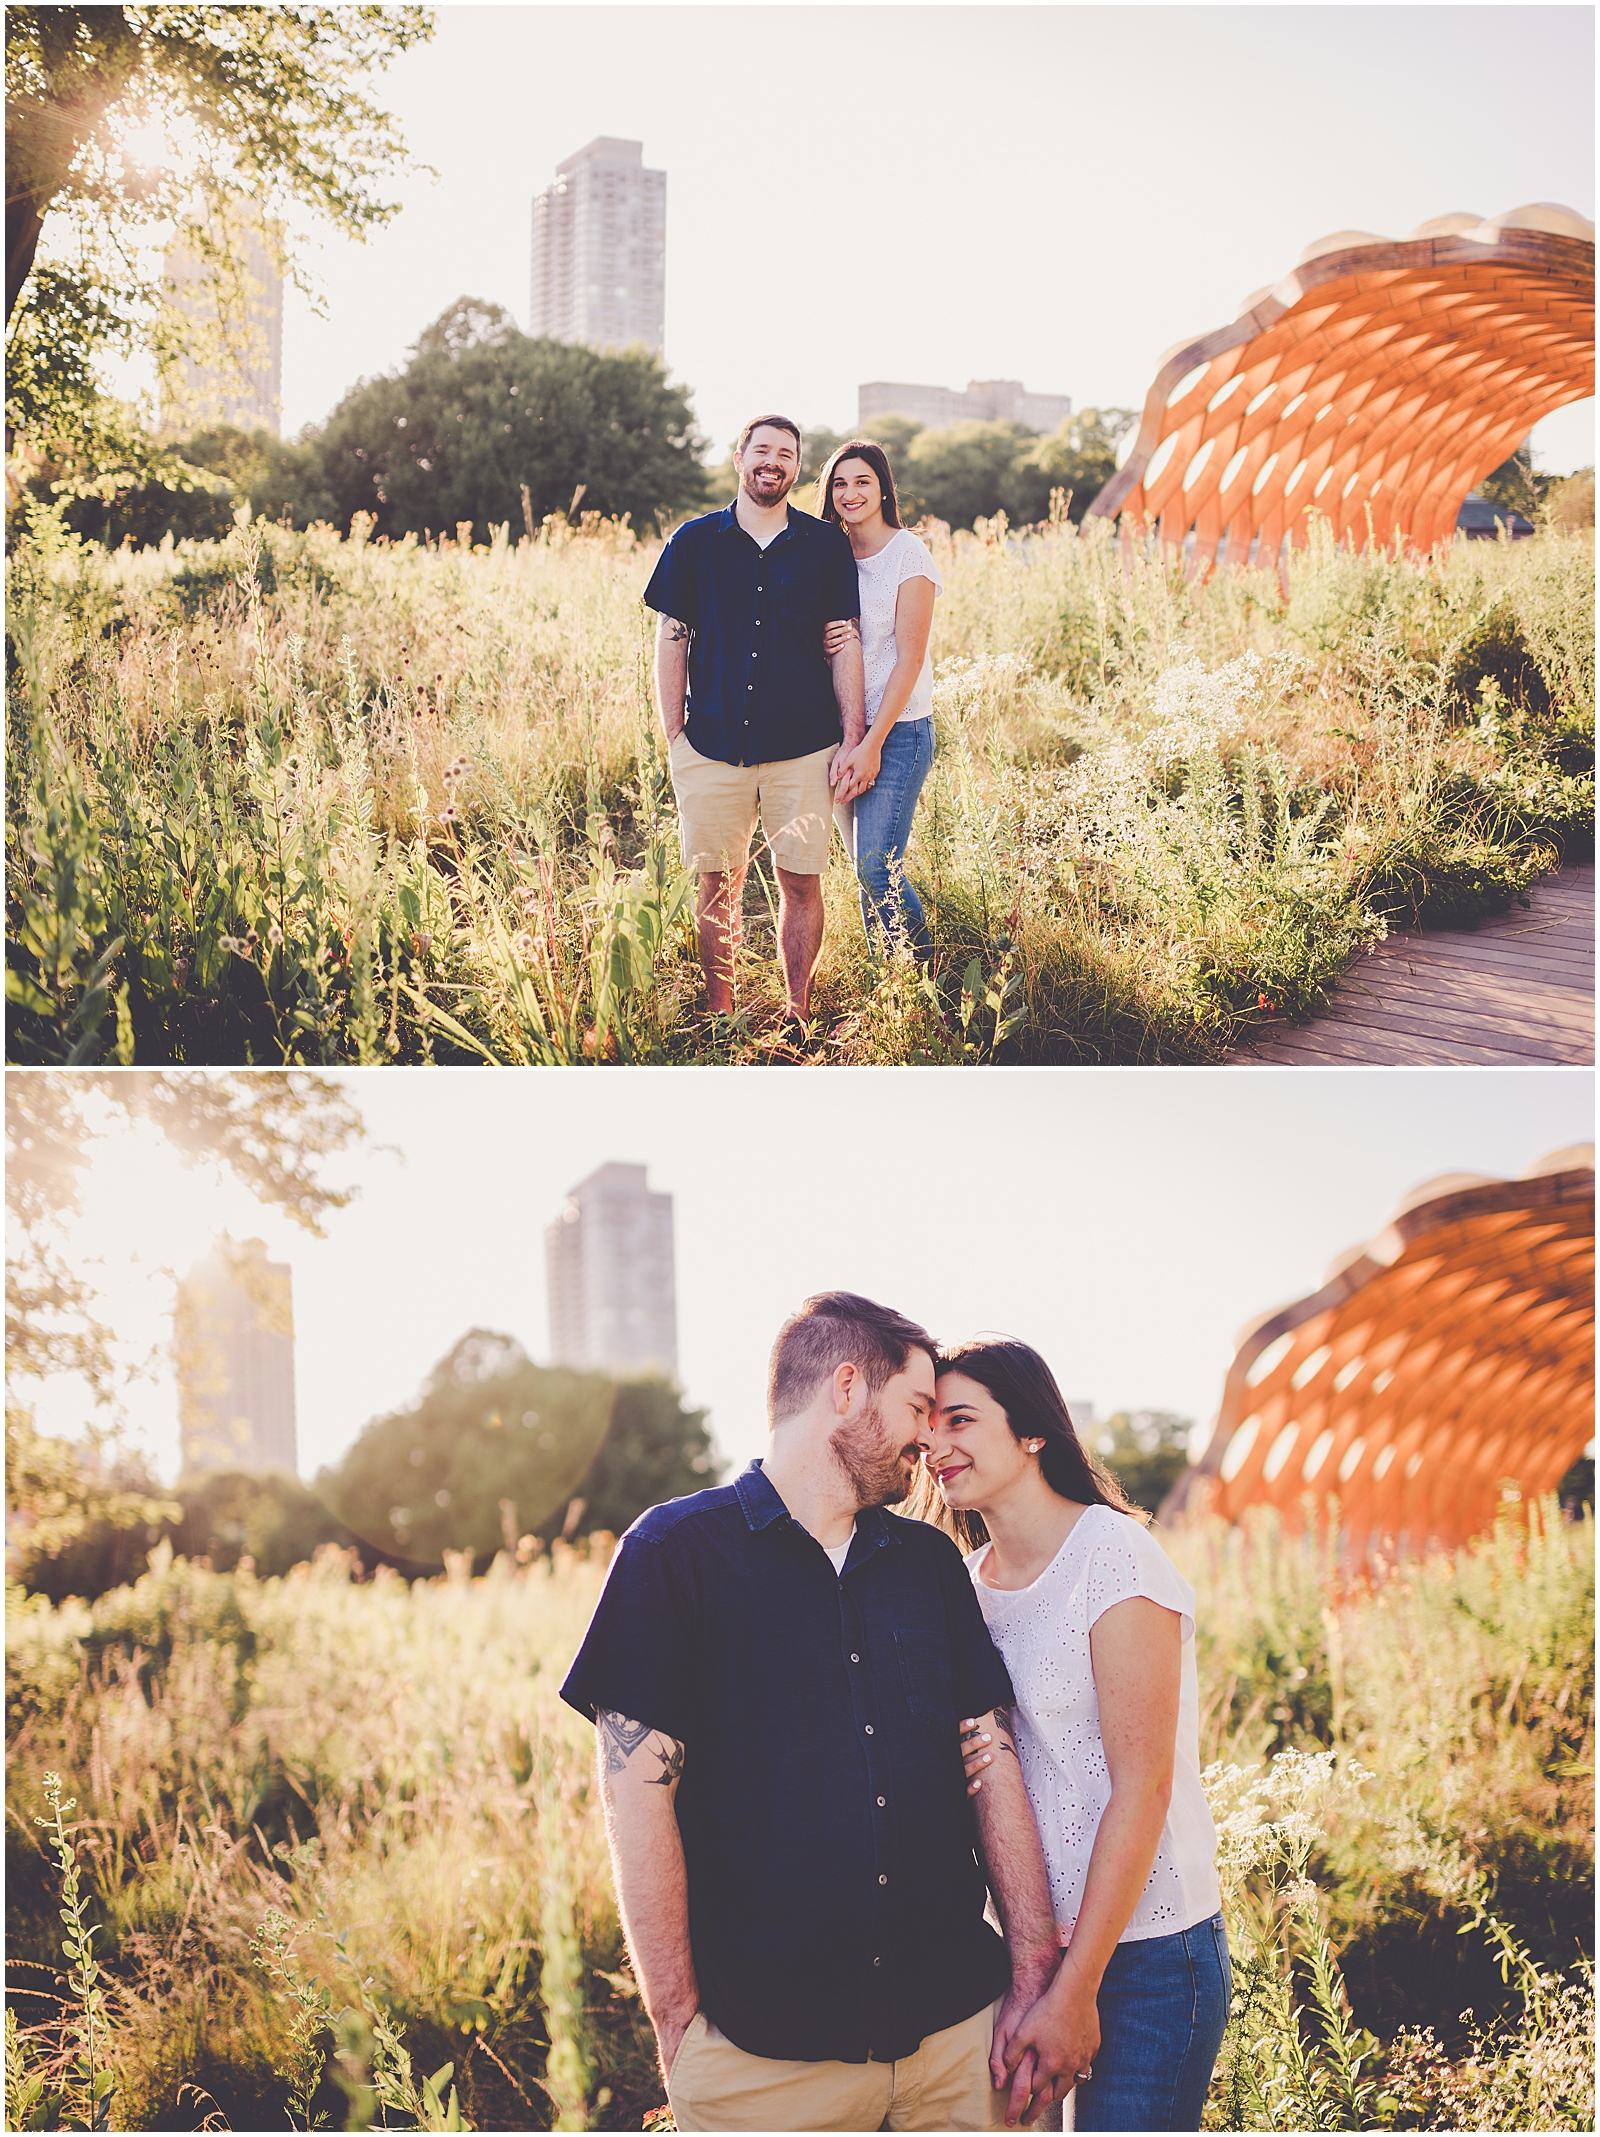 Michelle and Derek's engagement photos at Lincoln Park and the Chicago skyline with Chicagoland wedding photographer Kara Evans Photographer.